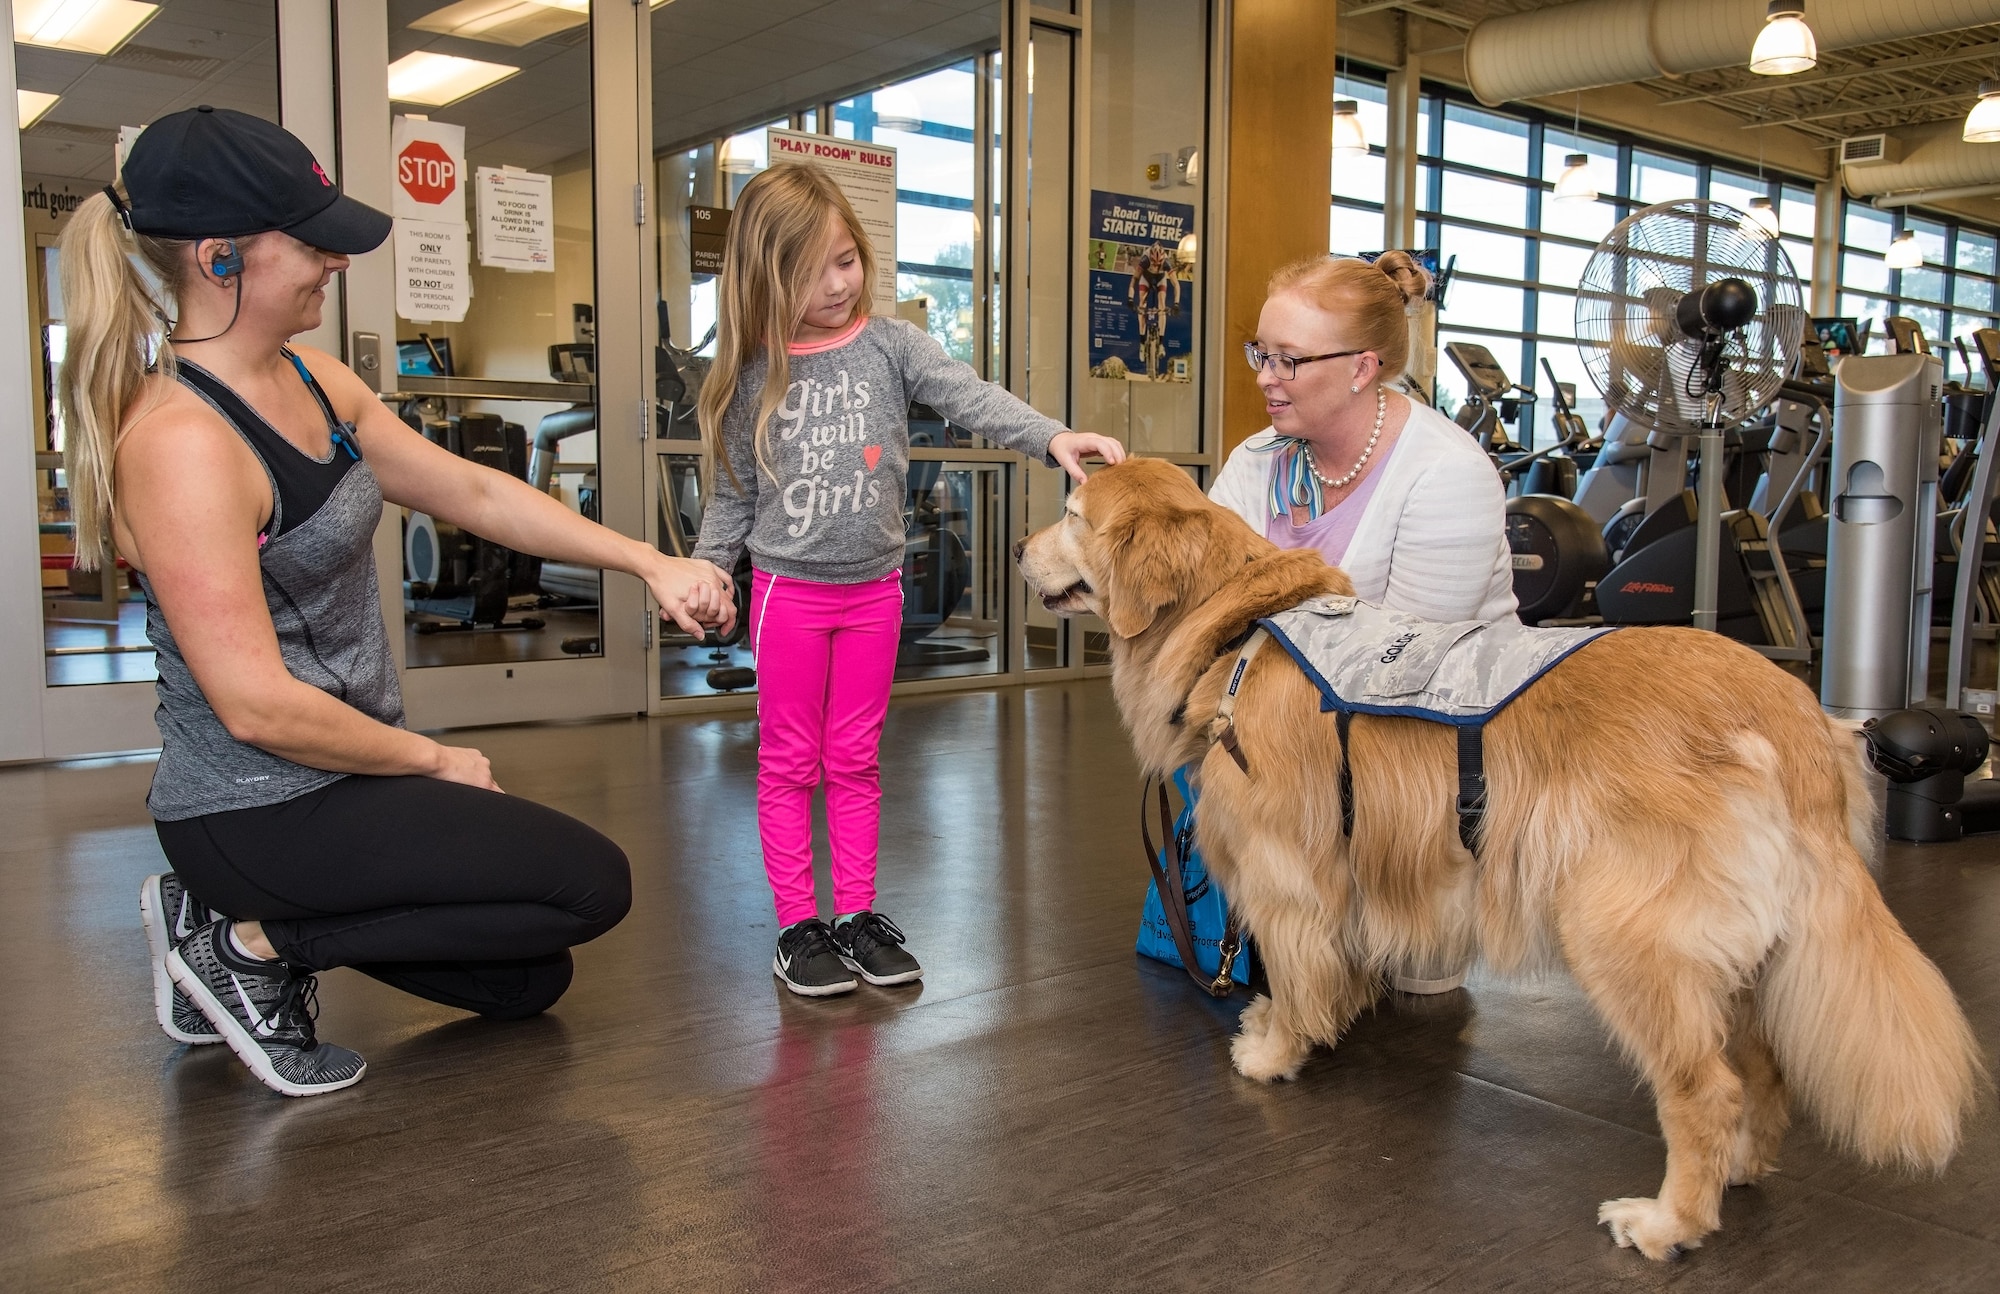 Addison Burrows, center, pets Lt. Col. Goldie, the only U.S. Air Force therapy dog visiting personnel on the base as part of Family Advocacy’s Domestic Violence Awareness Month outreach, Oct. 19, 2017, at the Fitness Center on Dover Air Force Base, Del. Addison is the daughter of MaryAnne Burrows, pictured on the left, and Master Sgt. Chris Burrows, 436th Logistics Readiness Squadron. (U.S. Air Force photo by Roland Balik)